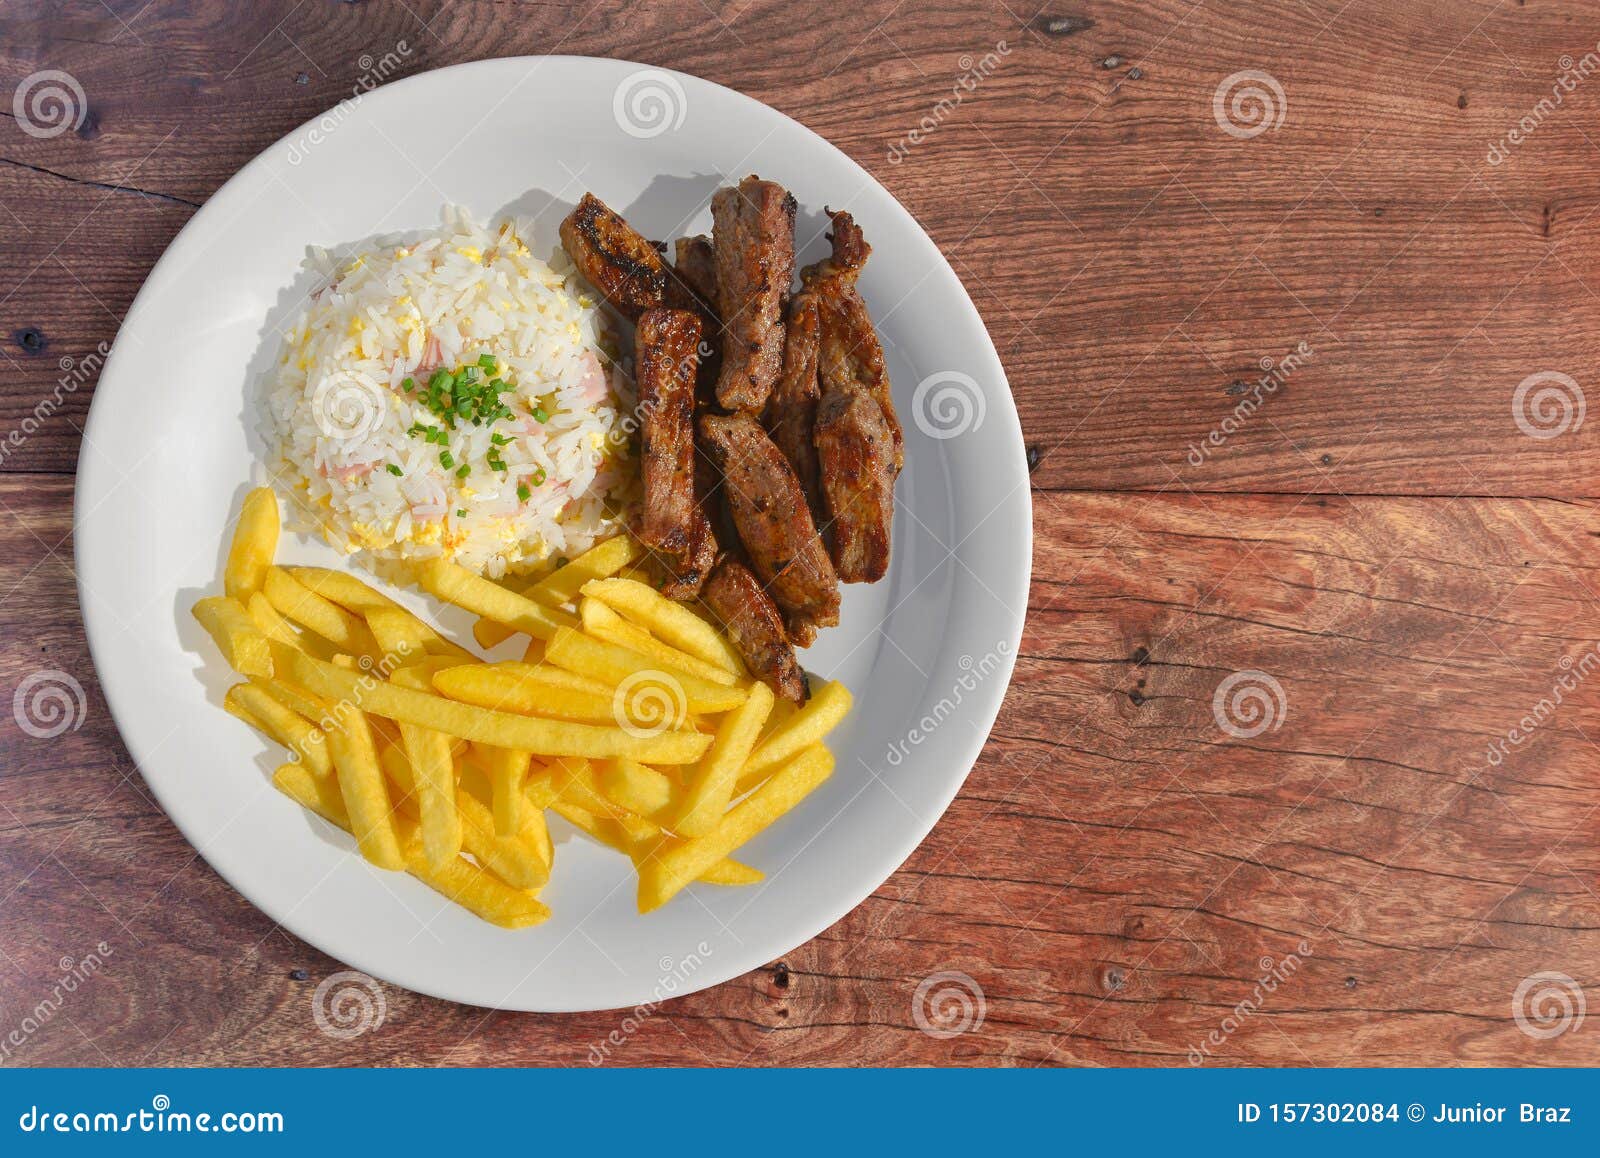 sliced steak with rice and fries sides